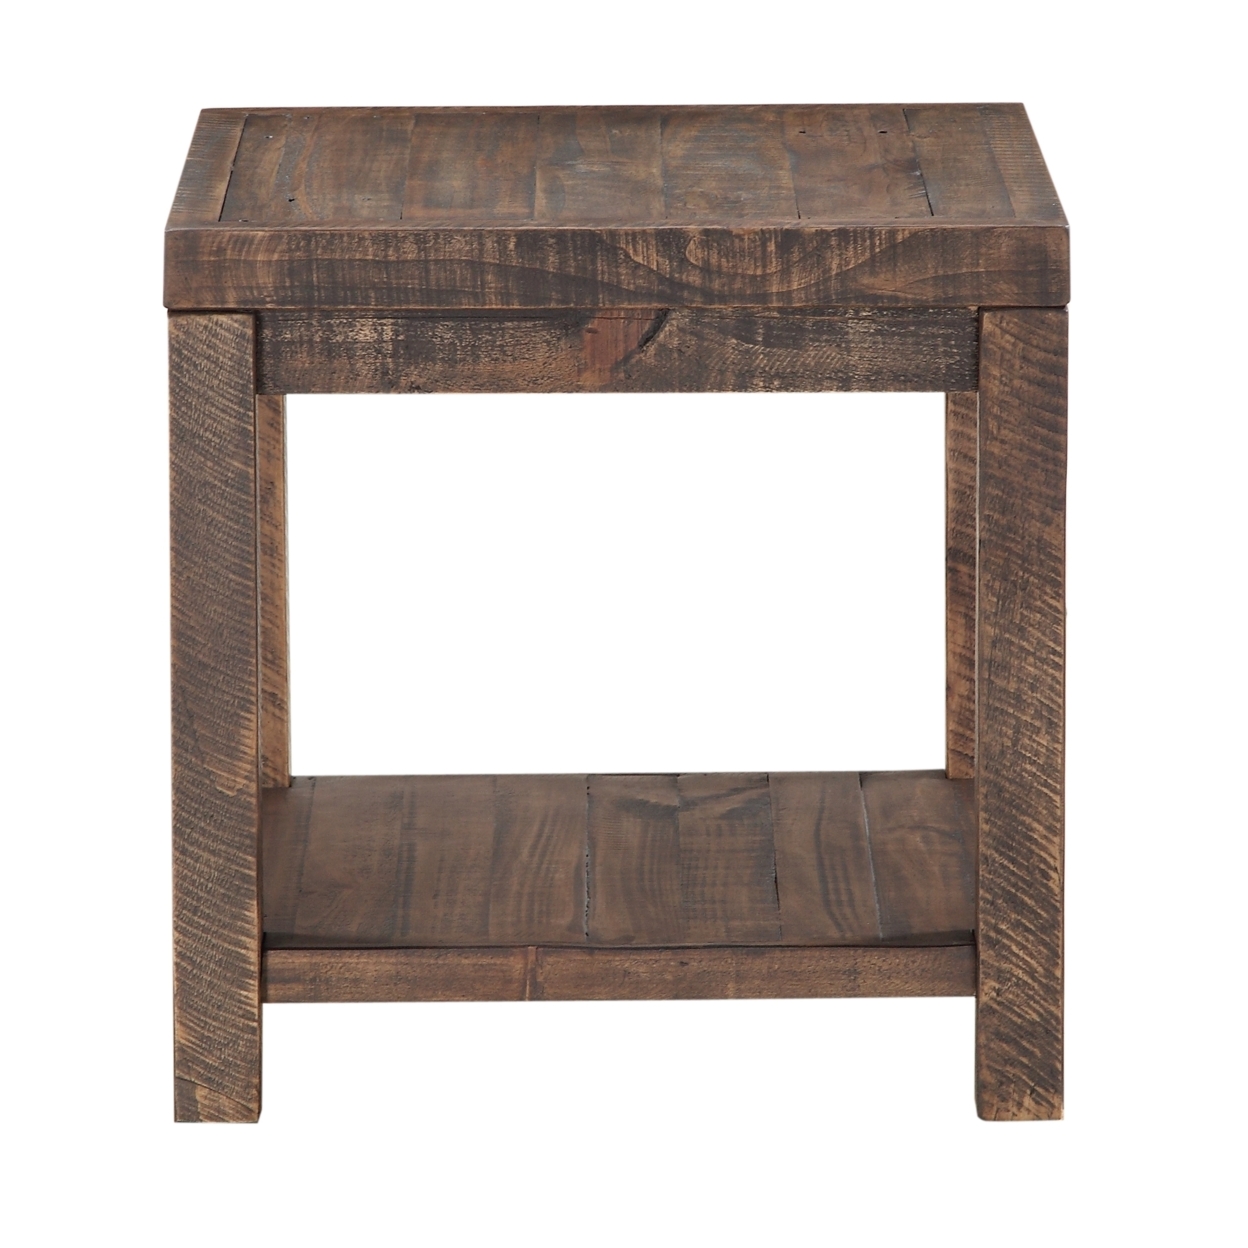 Wooden End Table With One Shelf, Taupe Brown- Saltoro Sherpi